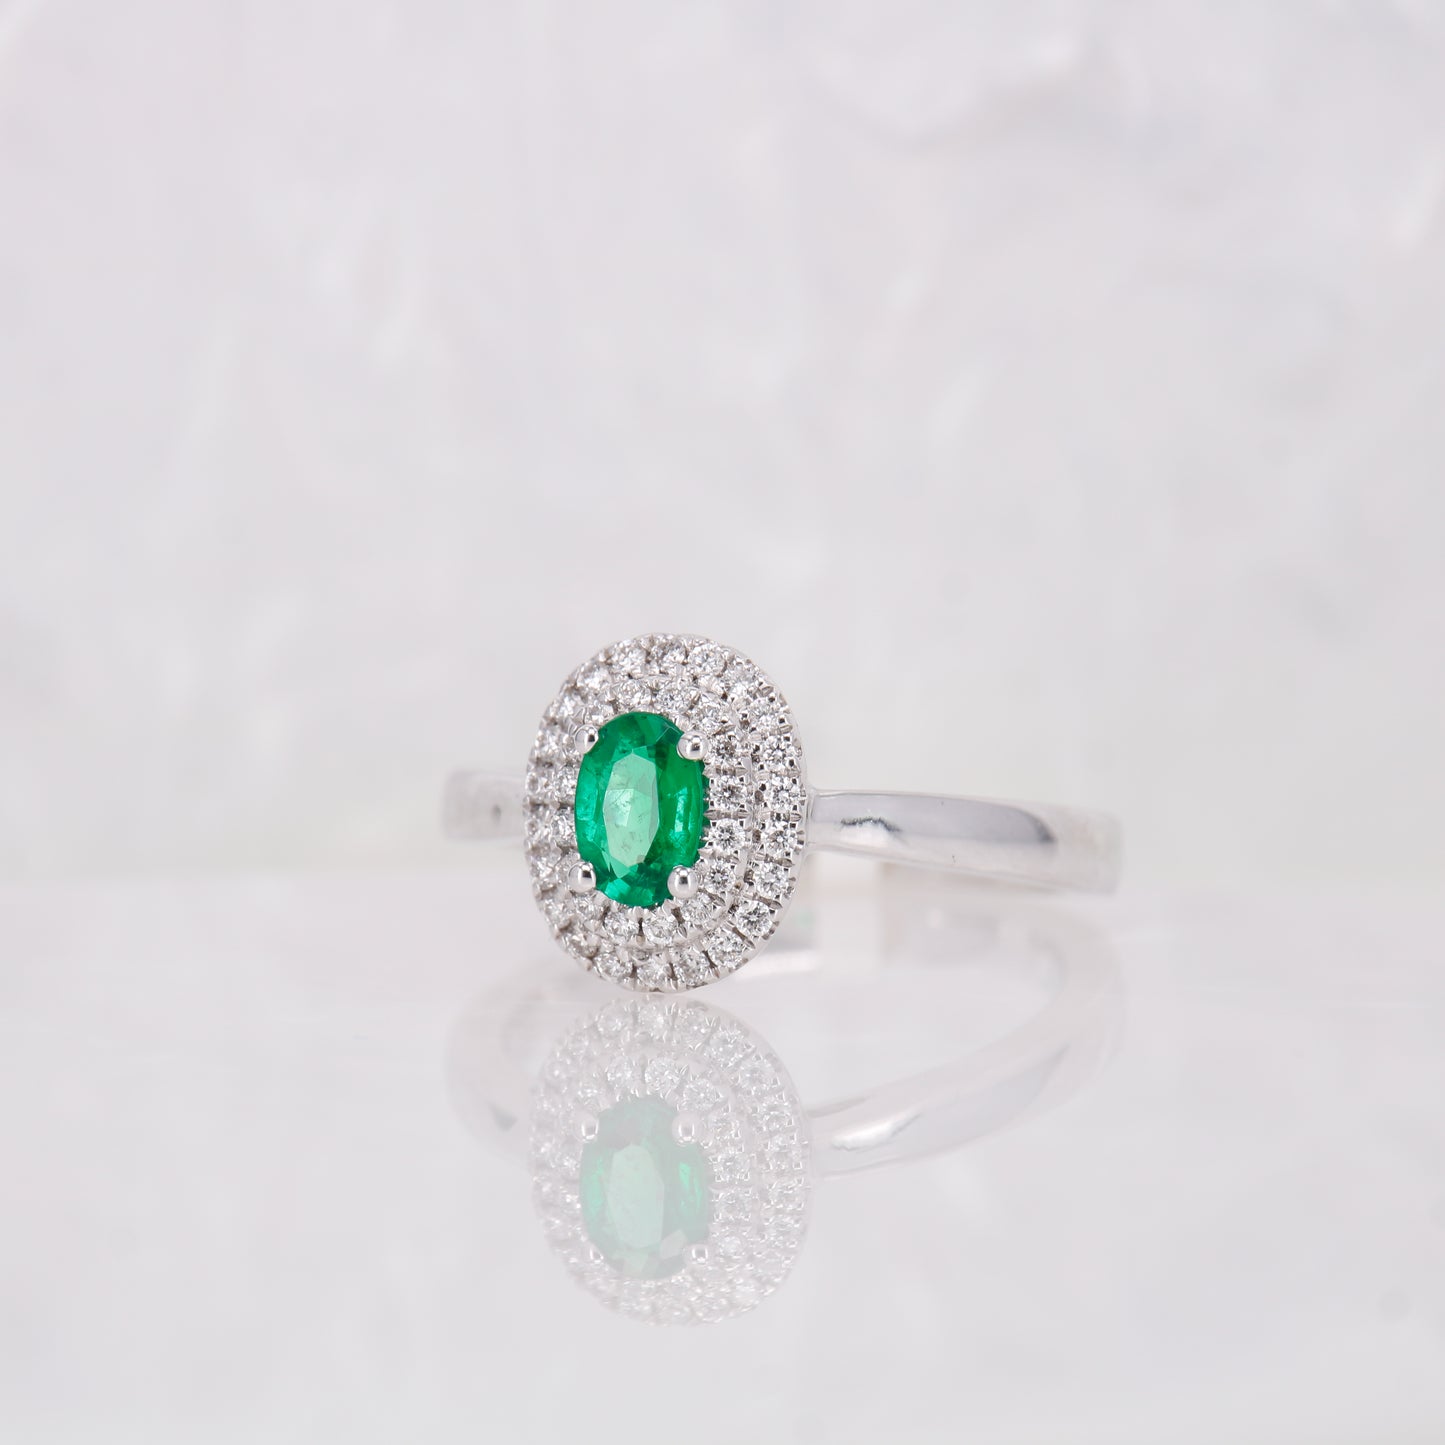 Oval Emerald Cut and double Halo Diamond Ring, set in 18ct White gold. 